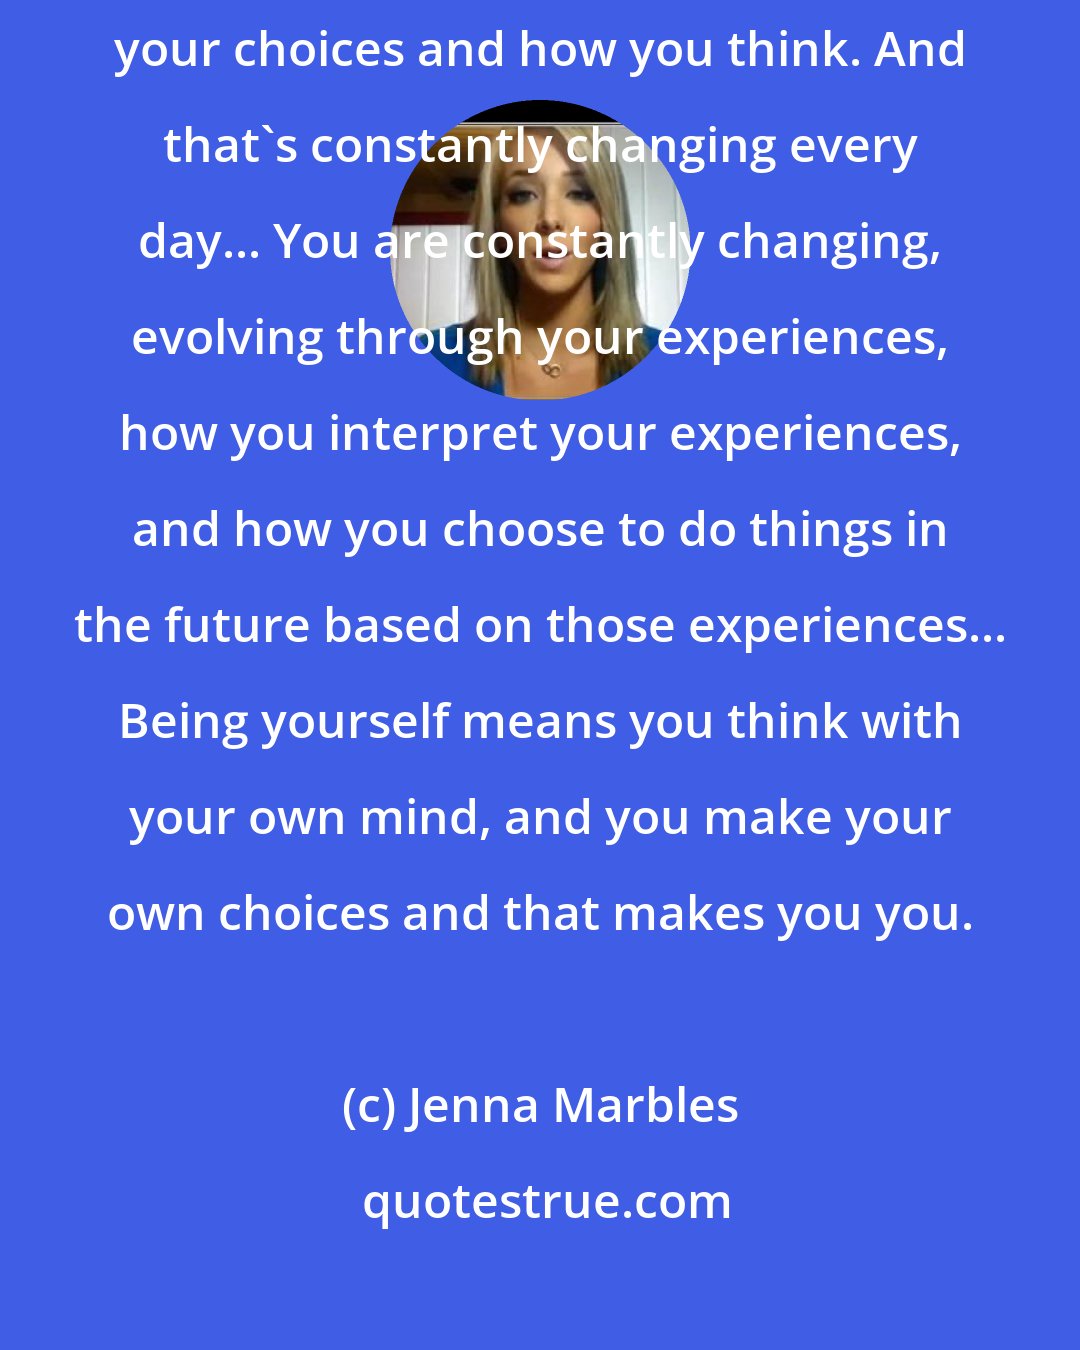 Jenna Marbles: I believe that you become yourself every single day of your life through your choices and how you think. And that's constantly changing every day... You are constantly changing, evolving through your experiences, how you interpret your experiences, and how you choose to do things in the future based on those experiences... Being yourself means you think with your own mind, and you make your own choices and that makes you you.